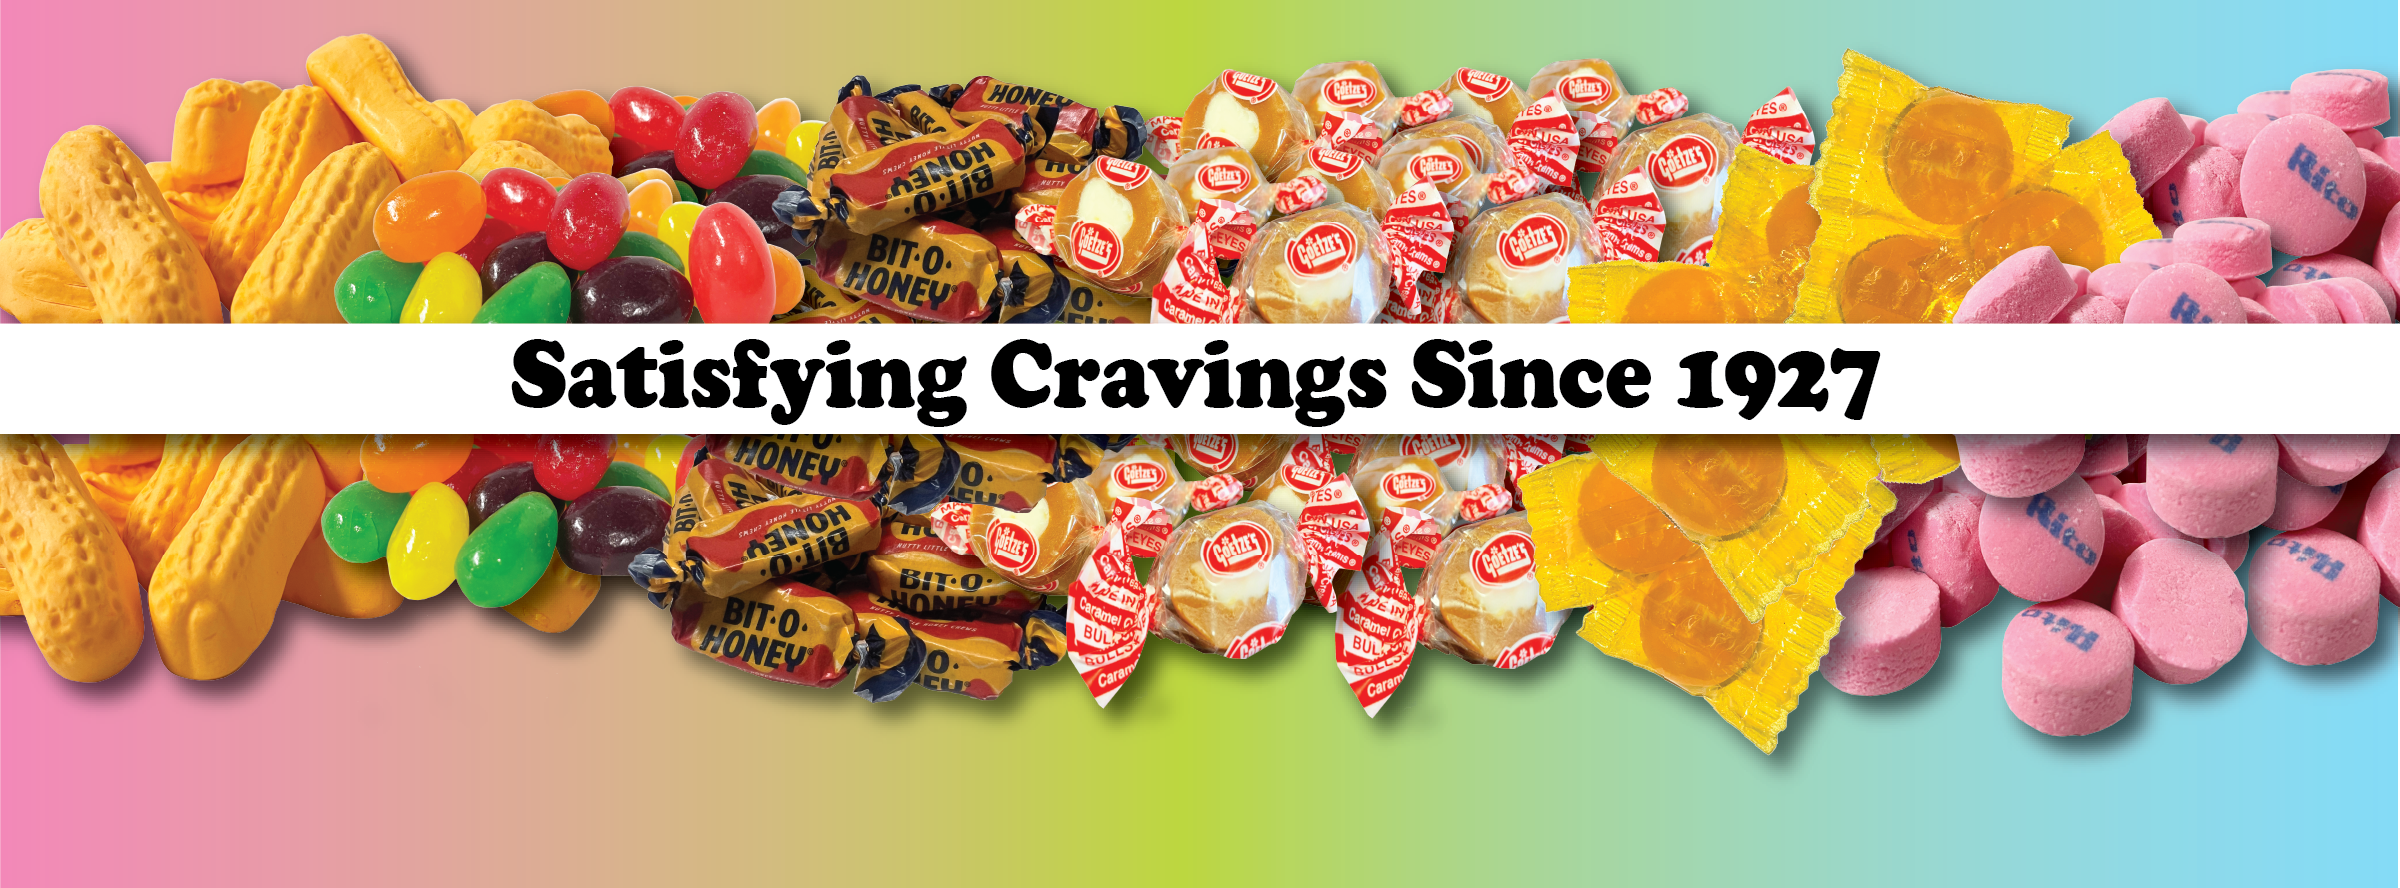 satisfying-cravings-candy-banner.png